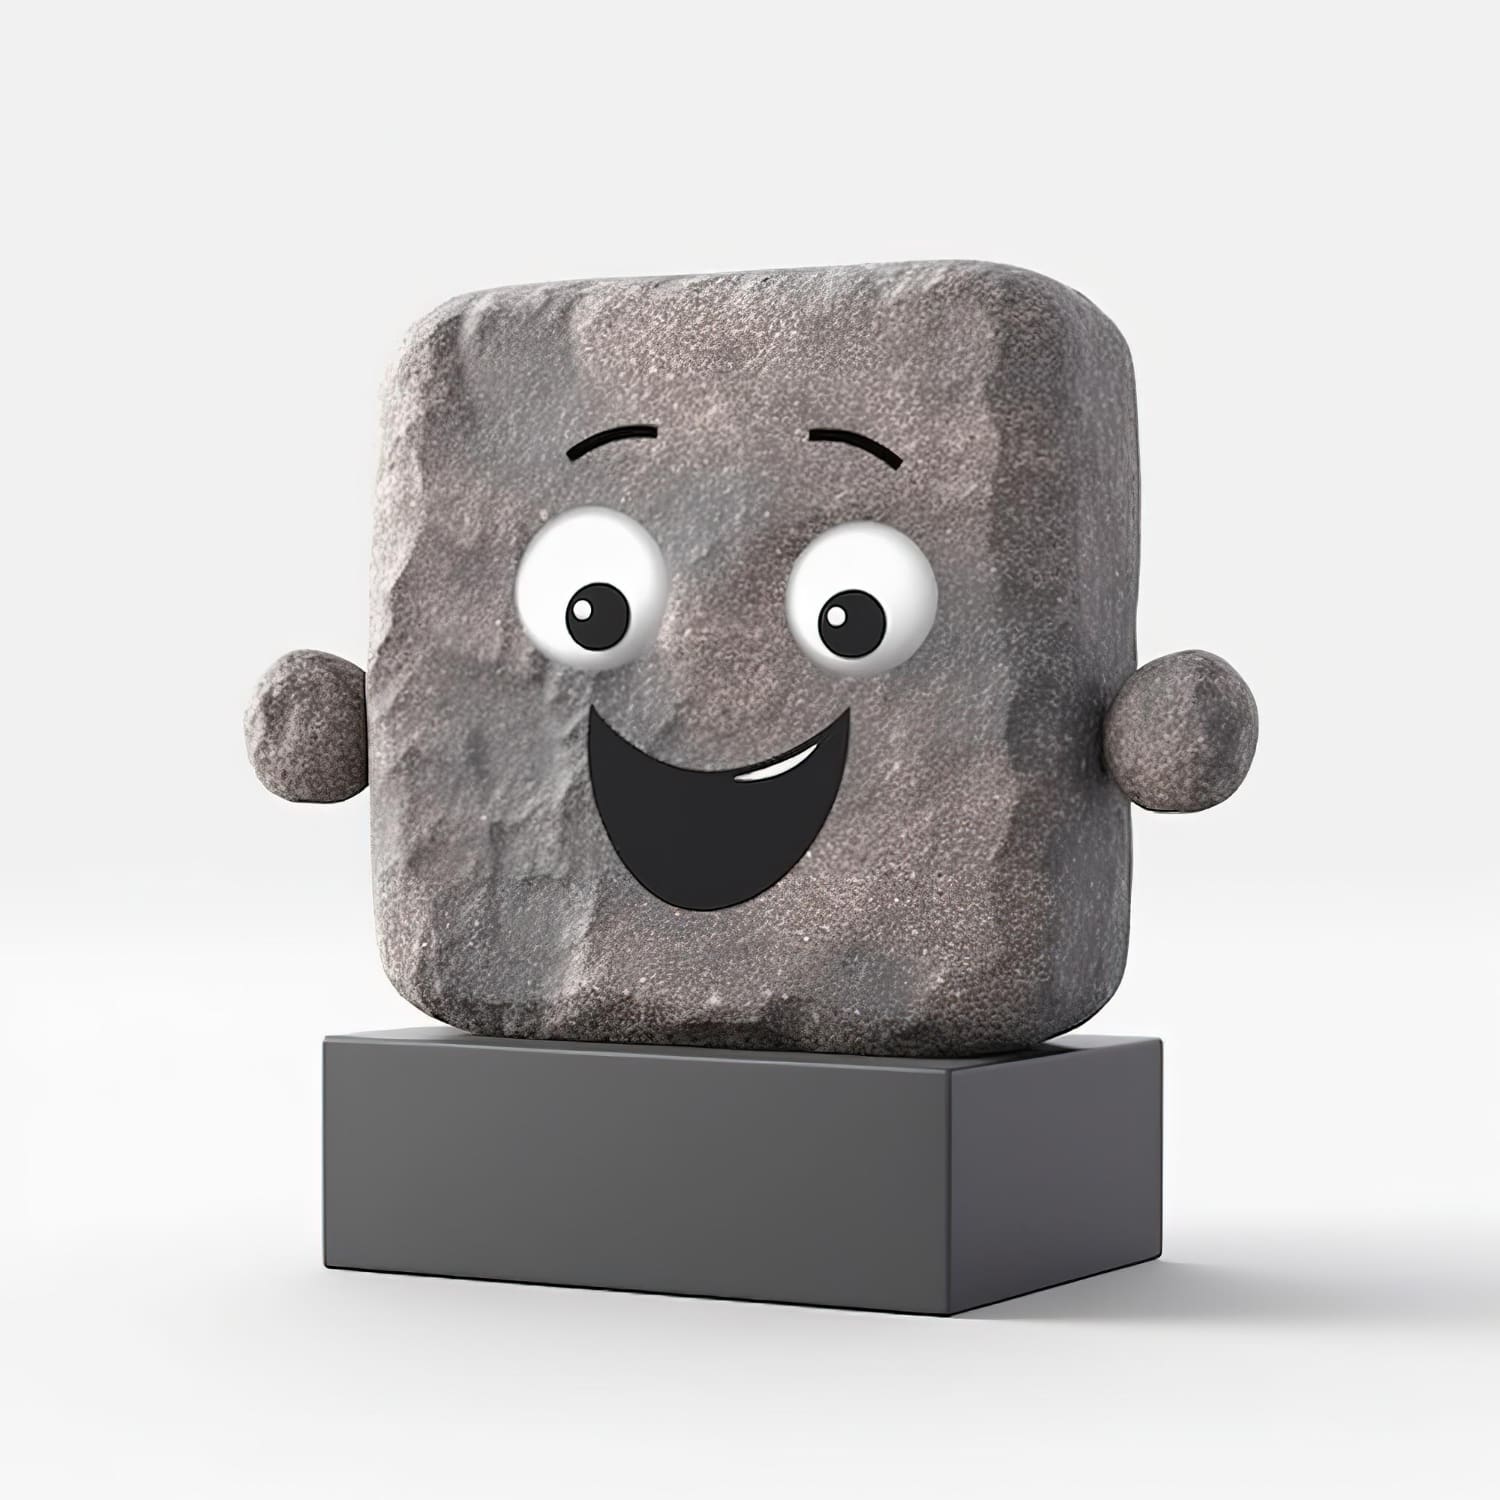 3d render abstract emotional face icon square emoji cute silly cubic toy 1